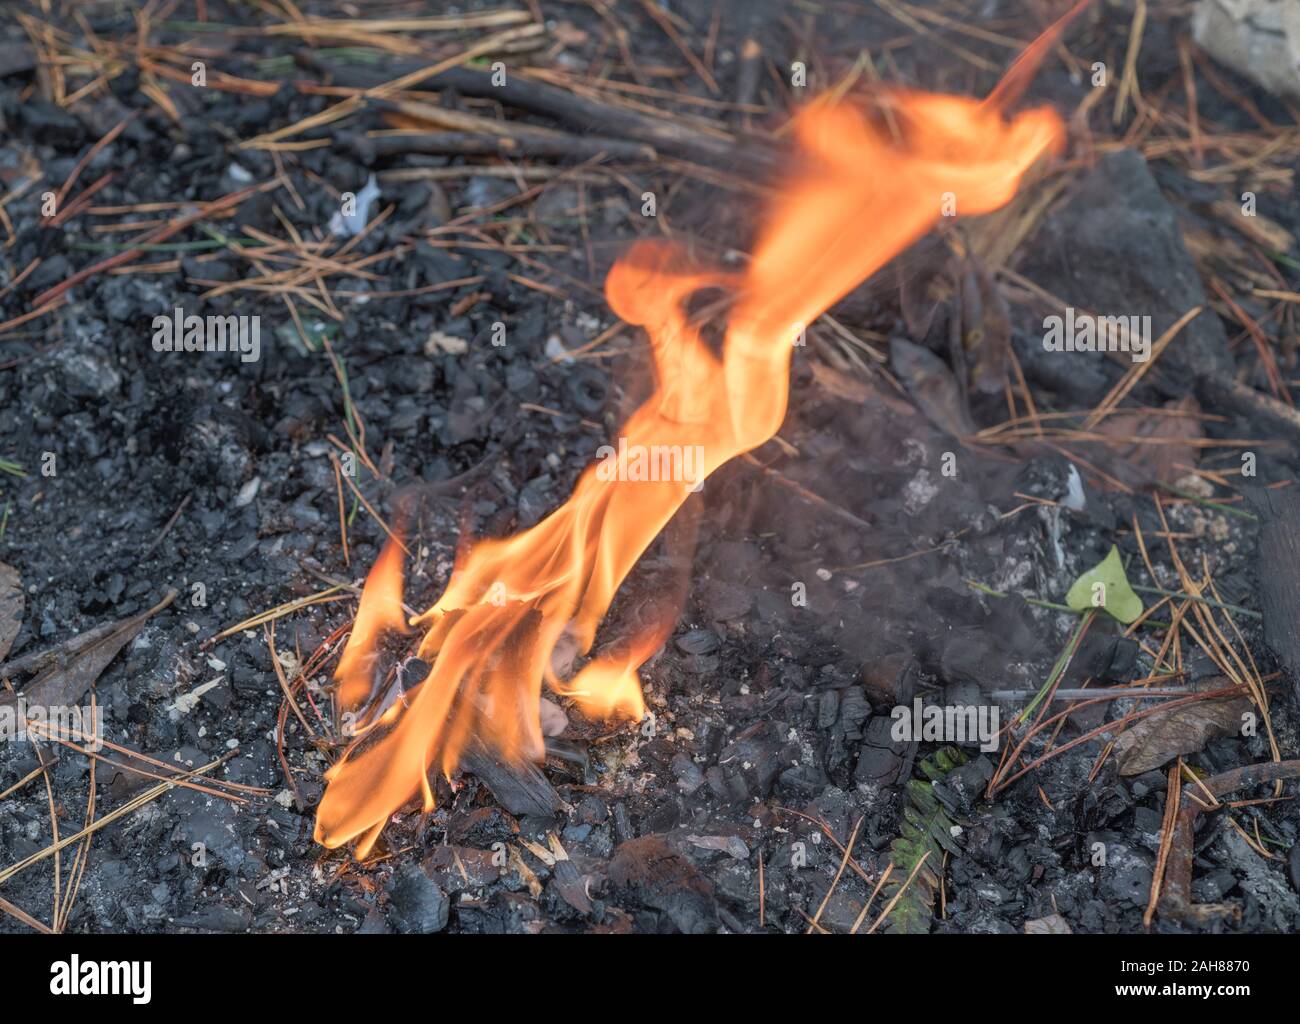 Burning pine resin gathered from Monterey Pine / Pinus radiata. Resin is flammable, burns with sooty flame, used for lighting emergency survival fires Stock Photo